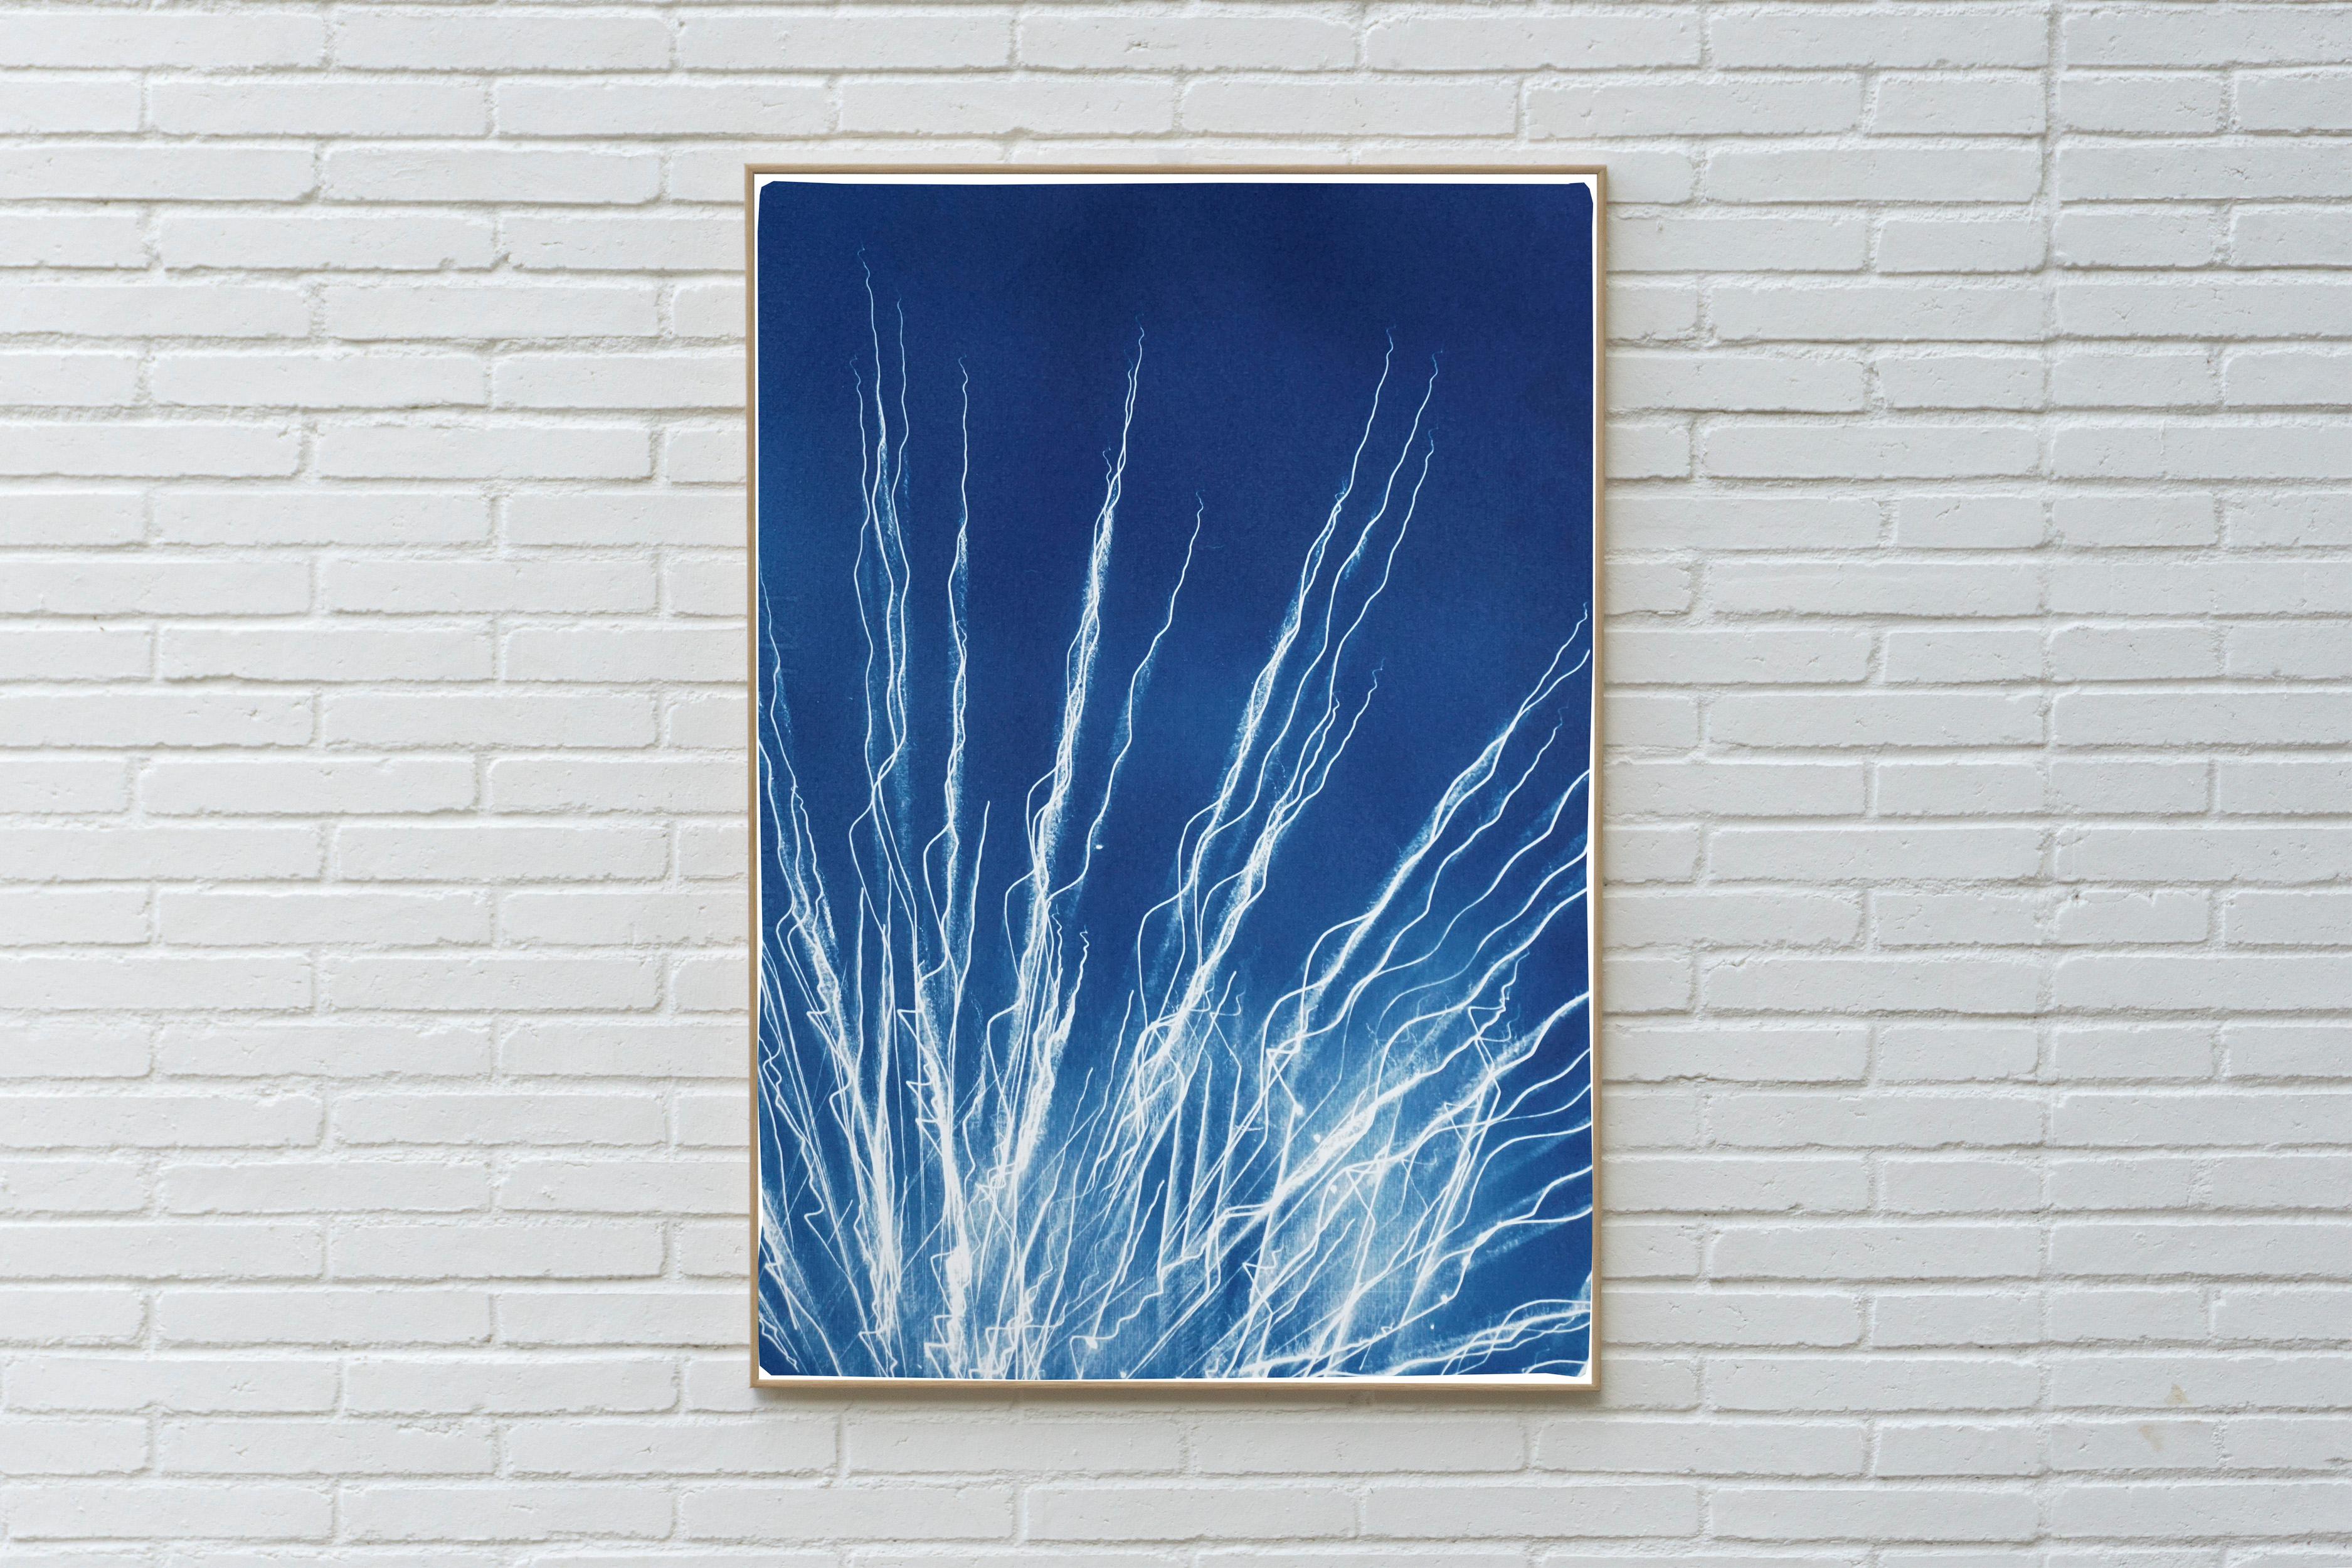 Glowing Fireworks Lights, Electric Blue and White Abstract Shapes, Cyanotype  - Print by Kind of Cyan